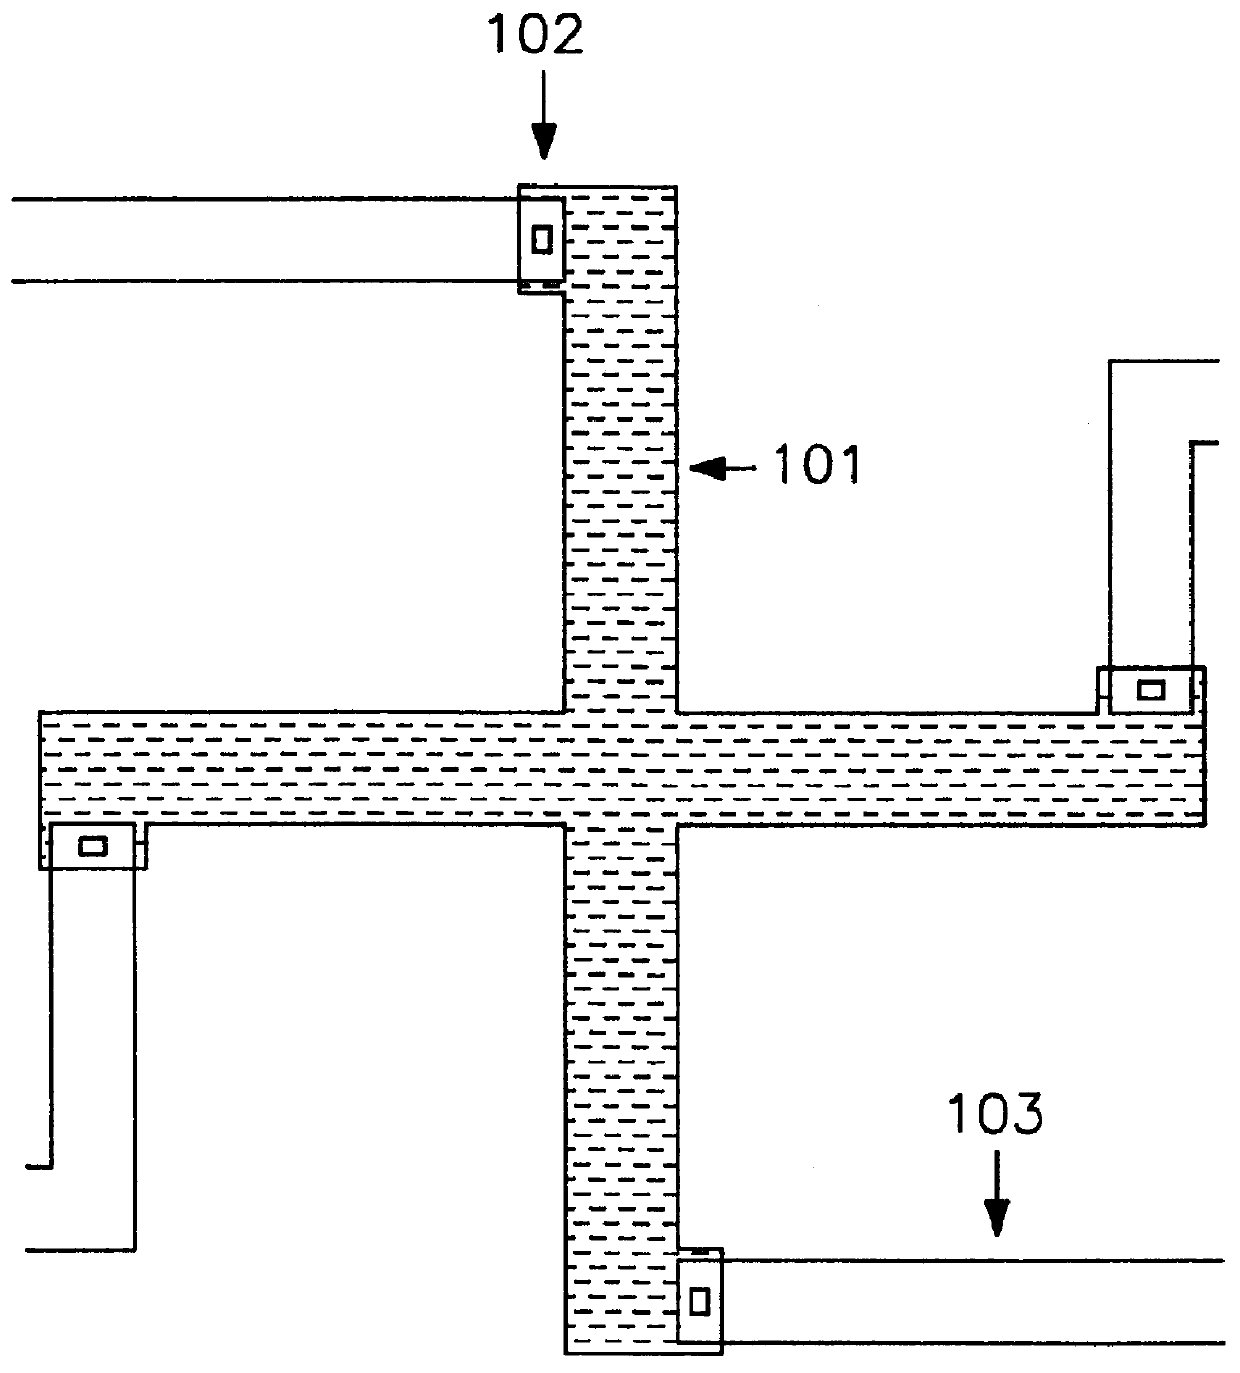 Test structure for monitoring overetching of silicide during contact opening